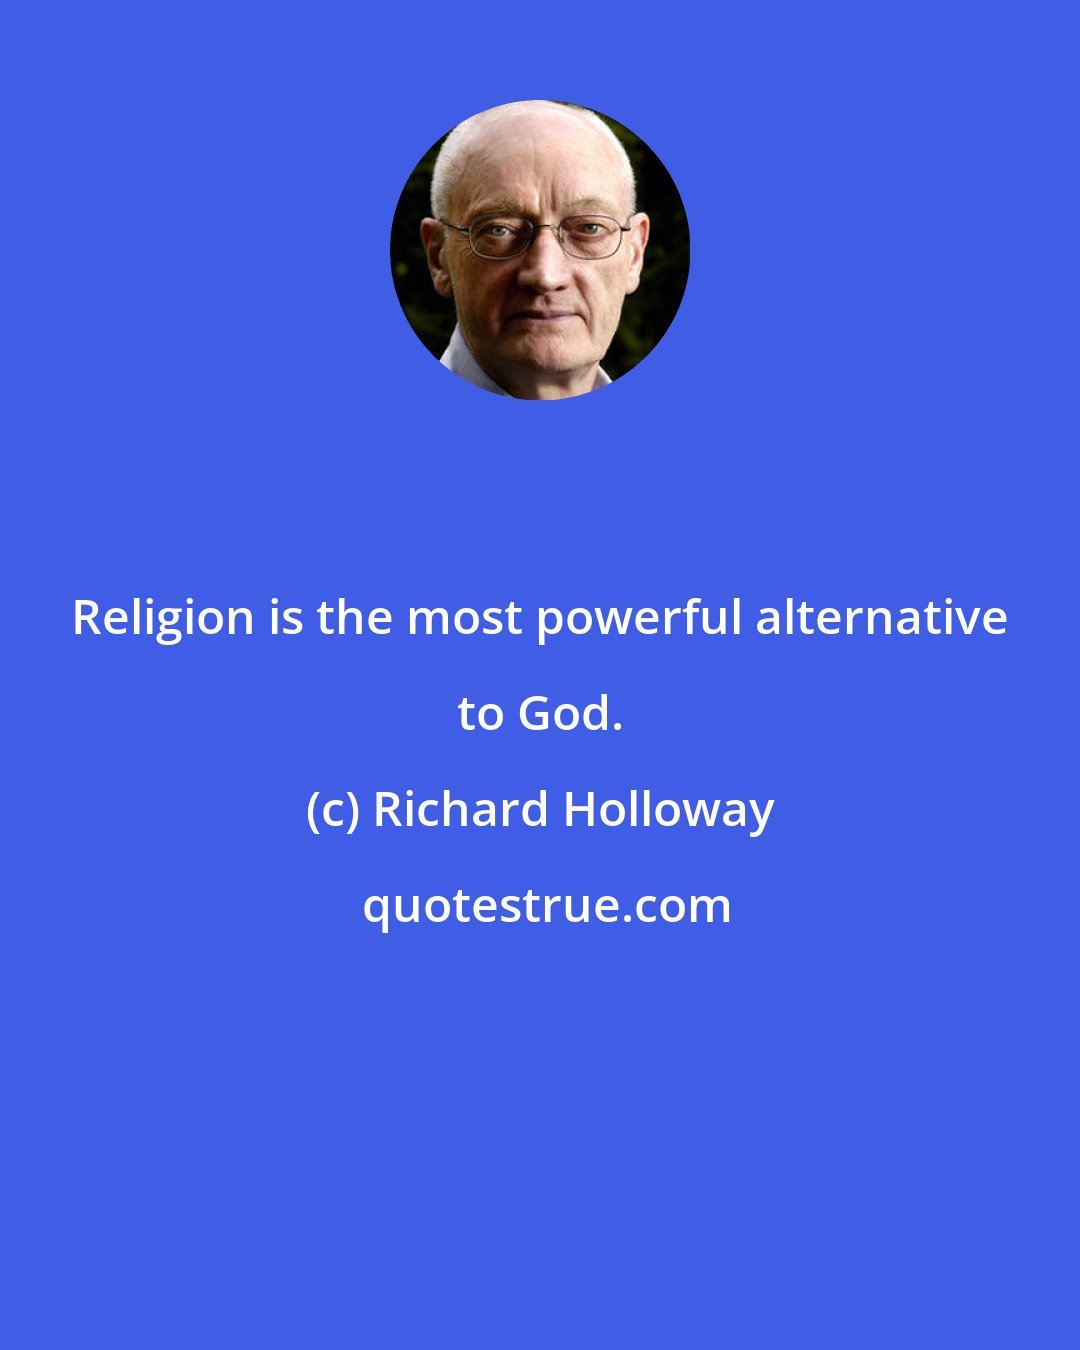 Richard Holloway: Religion is the most powerful alternative to God.